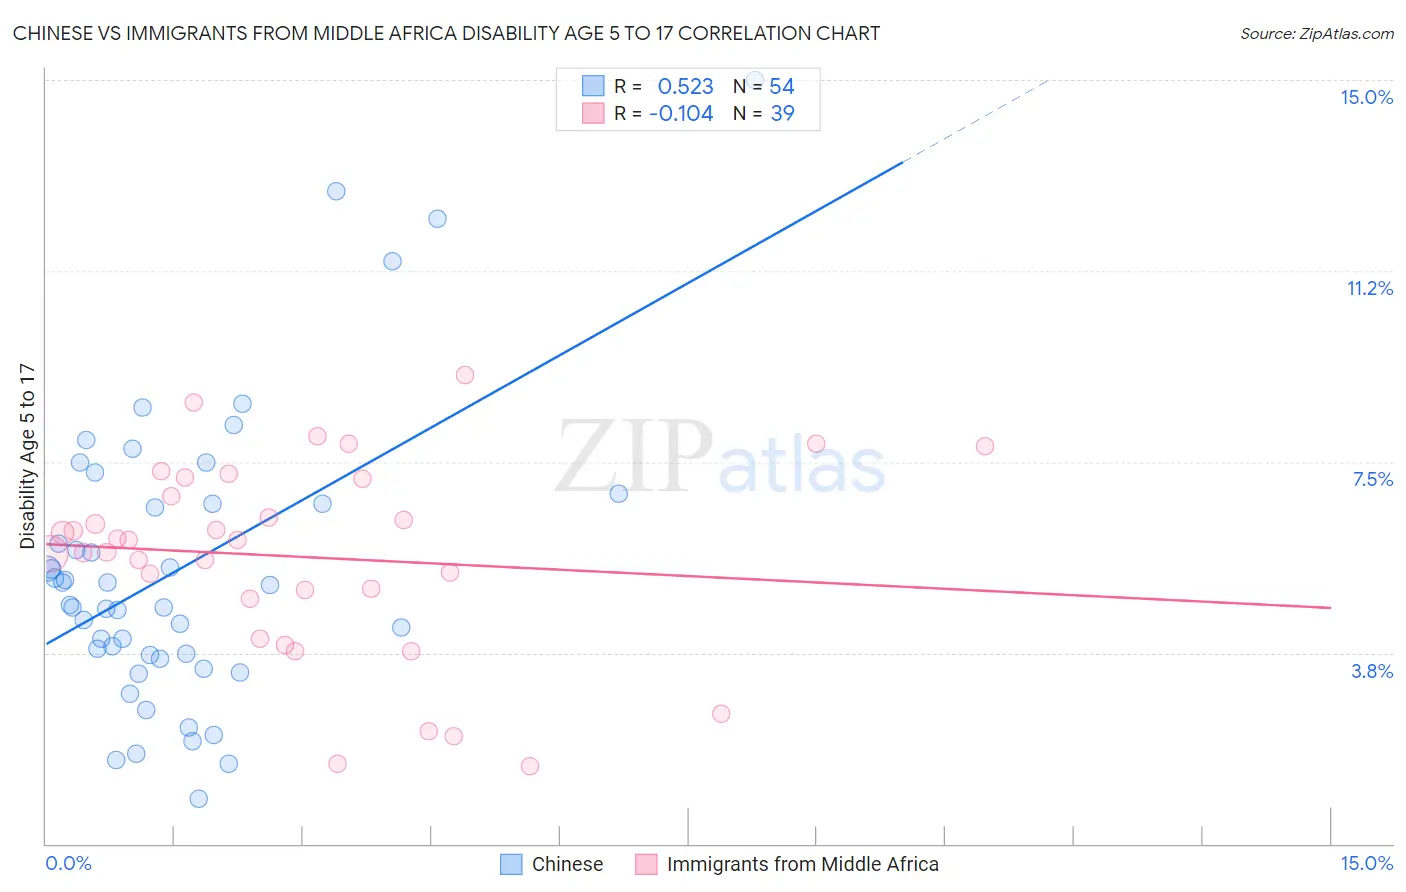 Chinese vs Immigrants from Middle Africa Disability Age 5 to 17